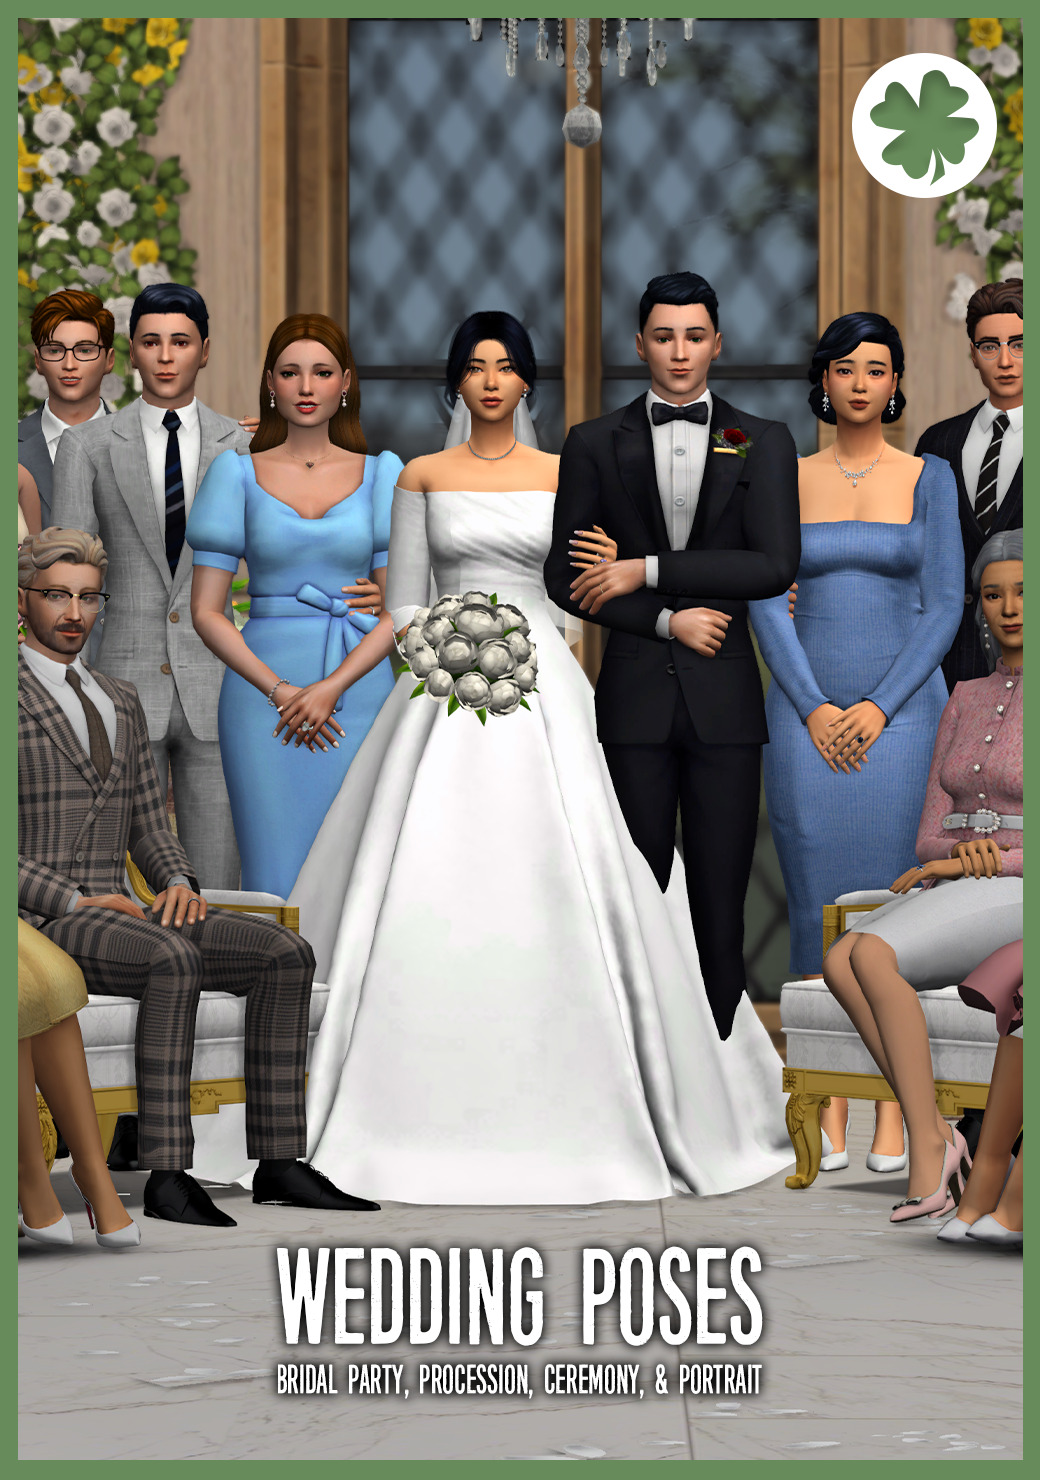 The Sims wedding pack pulled from Russia over anti-LGBT+ censorship